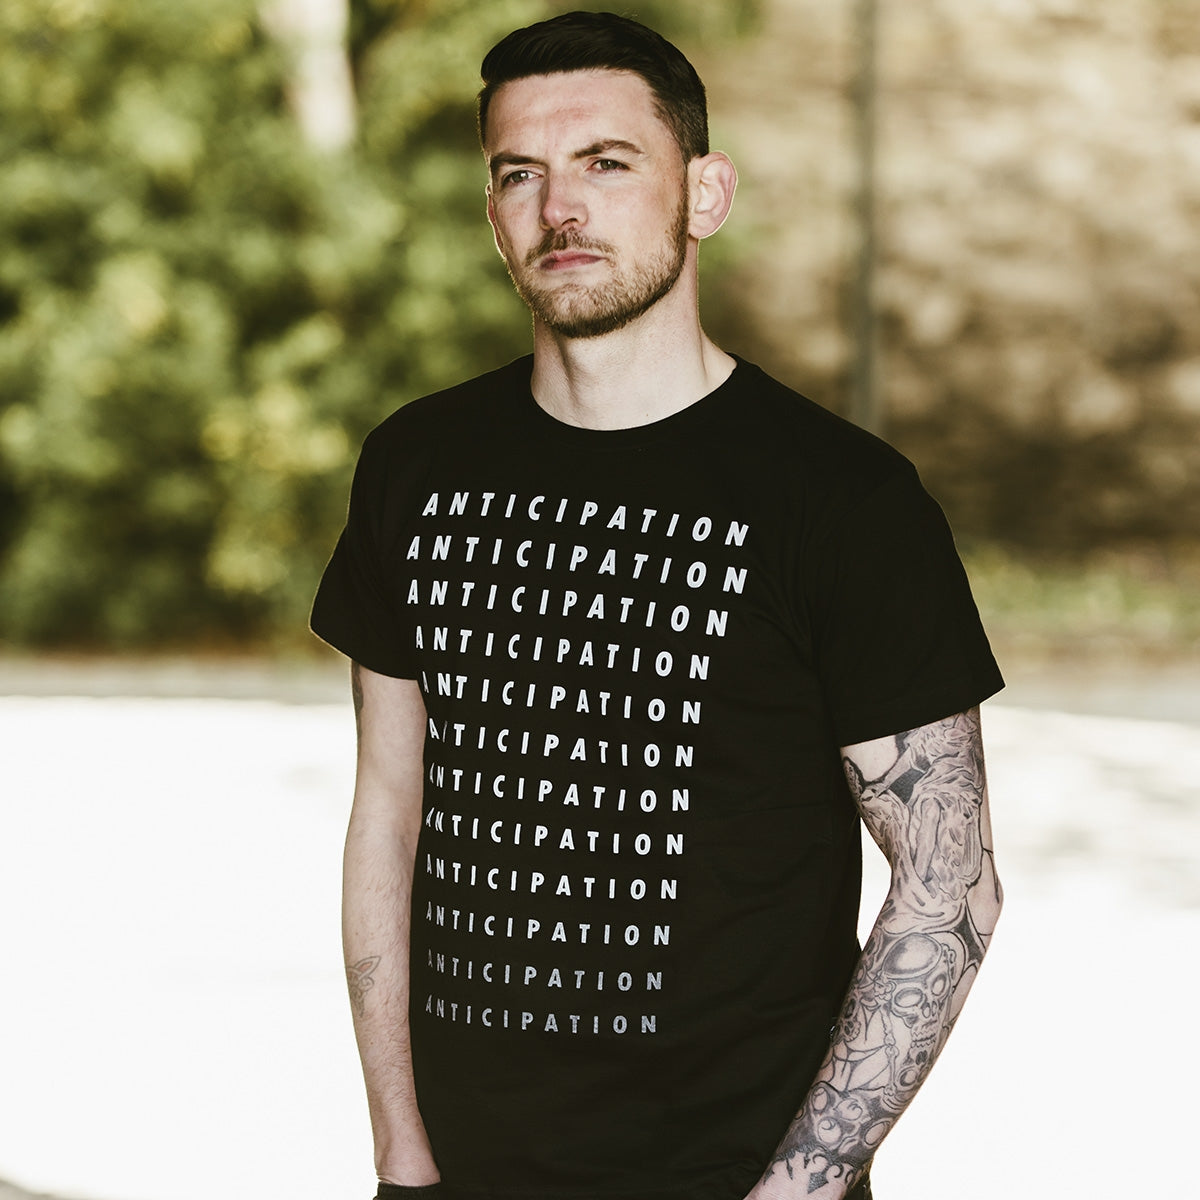 A man with tattoos wearing a Guinness Anticipation Pint Tee, showcasing both comfort and style.